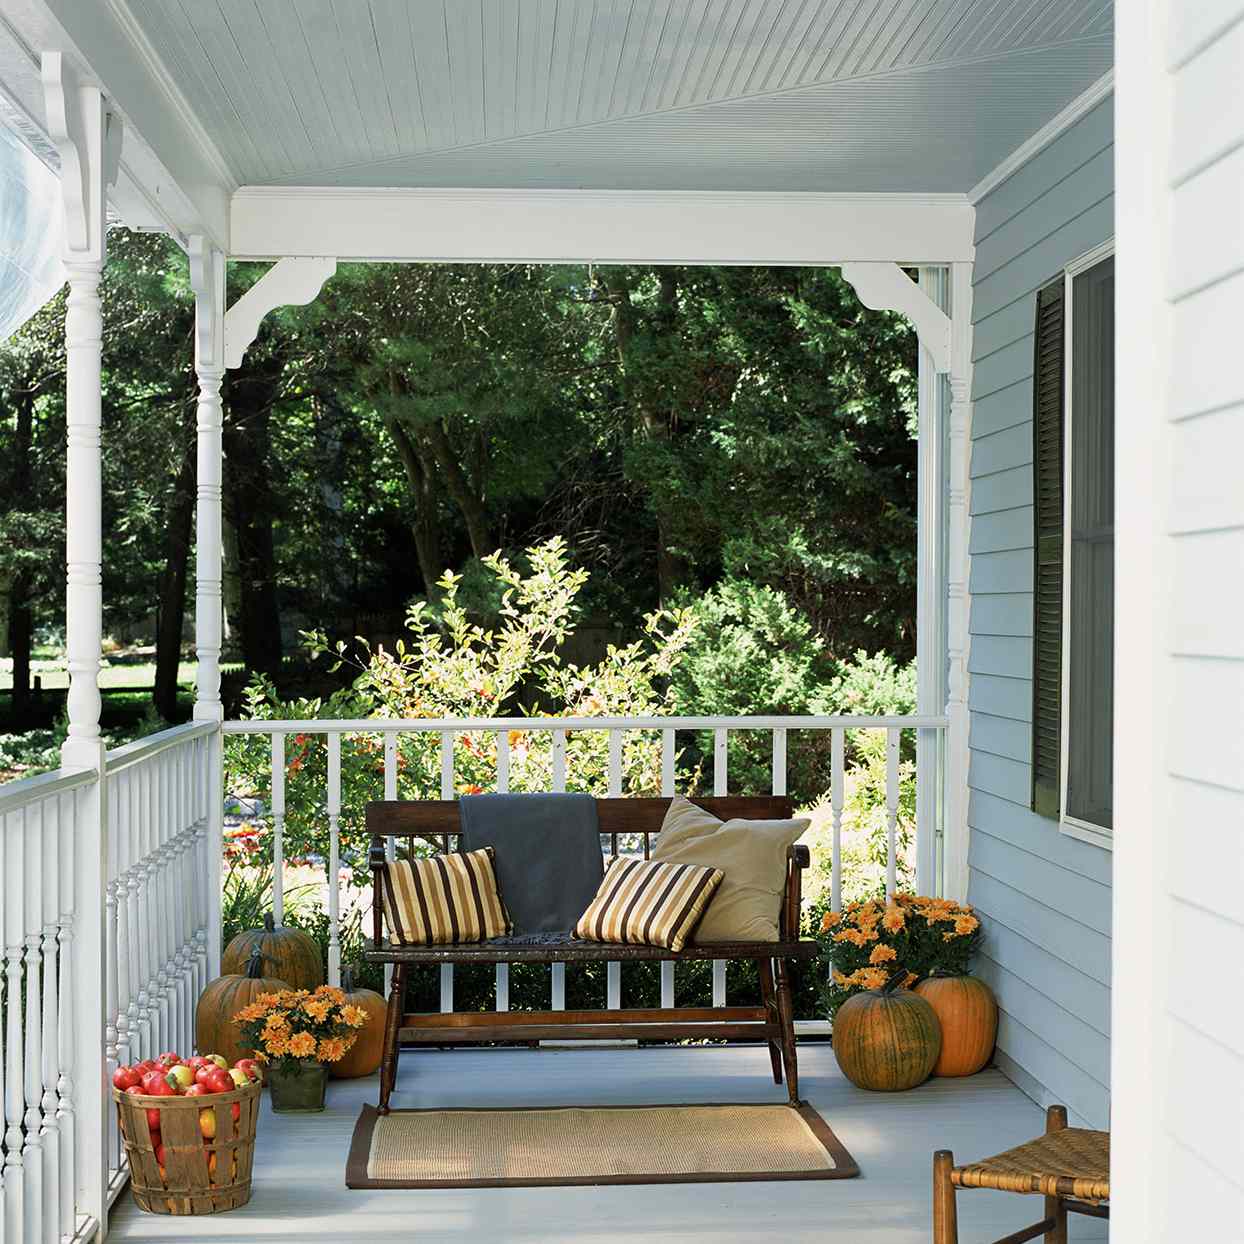 How To Paint A Porch For Upgraded Outdoor Living